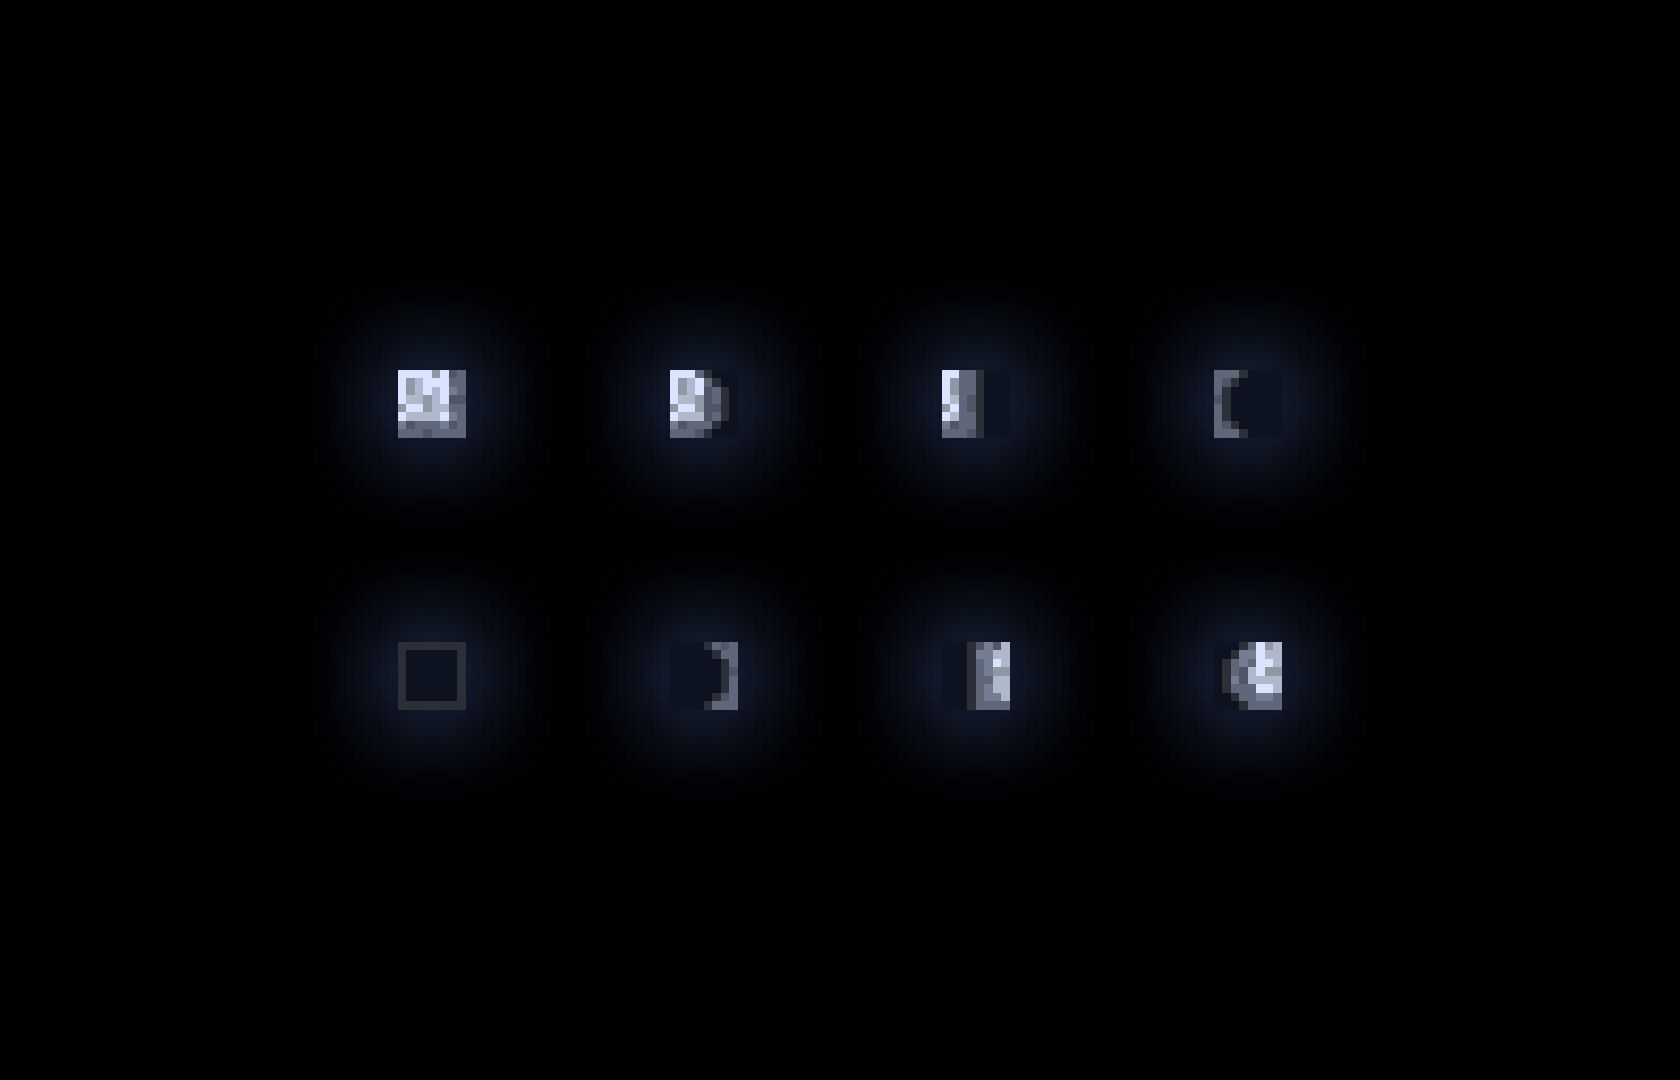 My minimal Minecraft moon phases wallpaper. Desktop and mobile